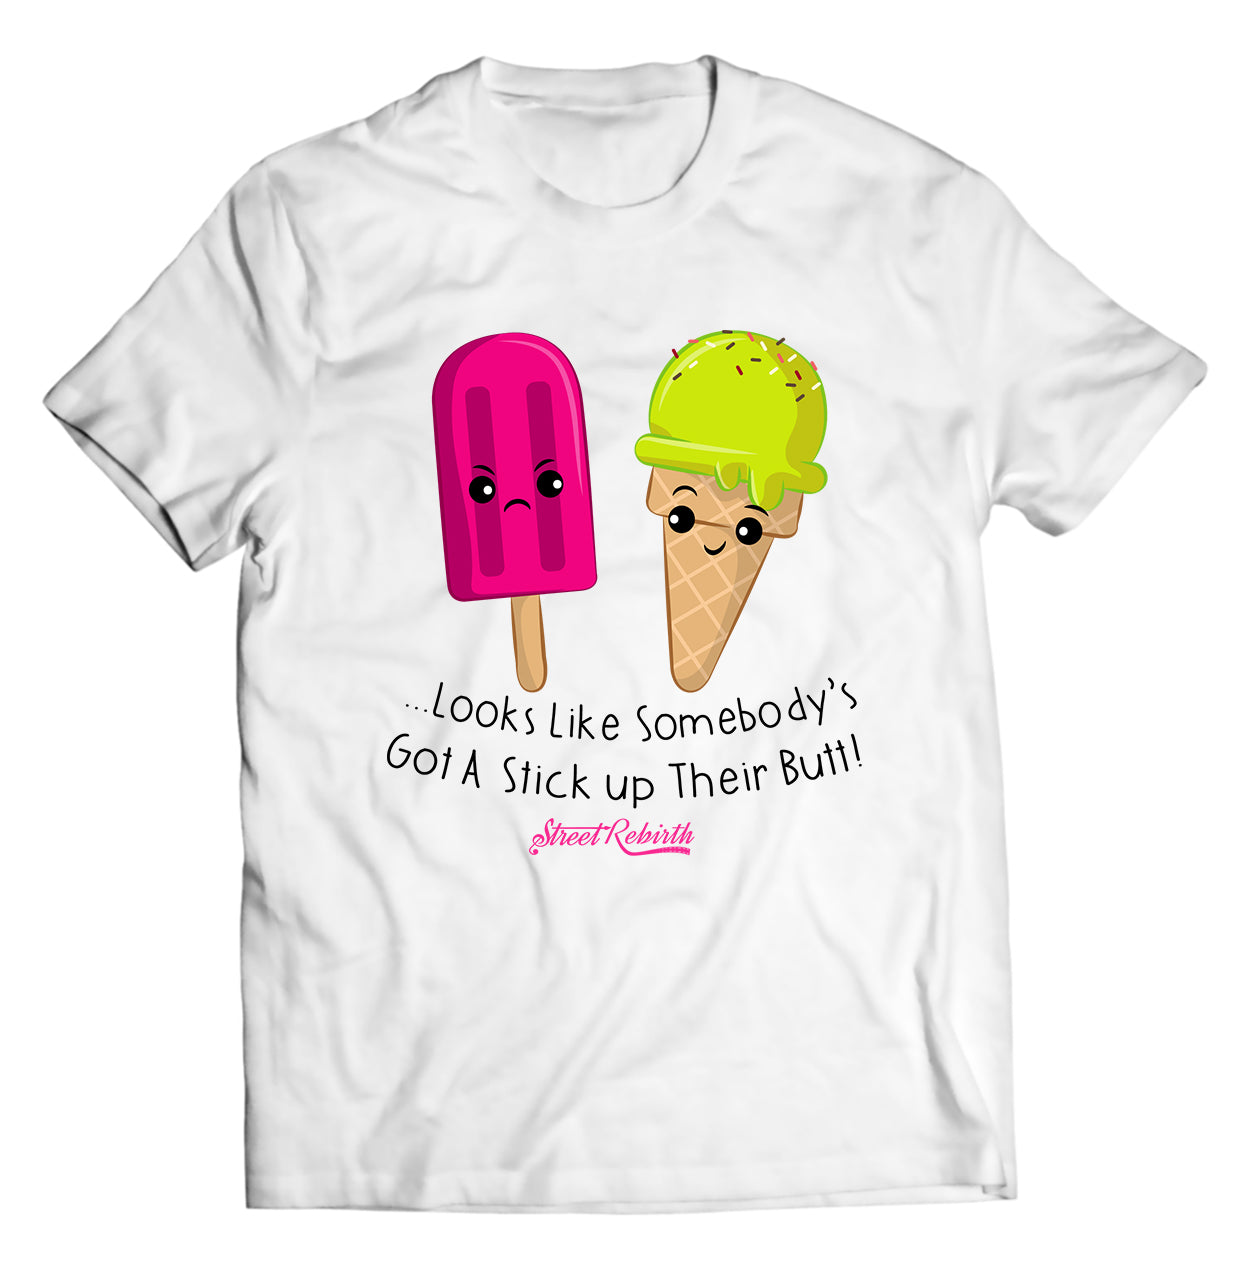 Looks Like Someones Got A Stick Up Their Butt Shirt - Direct To Garment Quality Print - Unisex Shirt - Gift For Him or Her